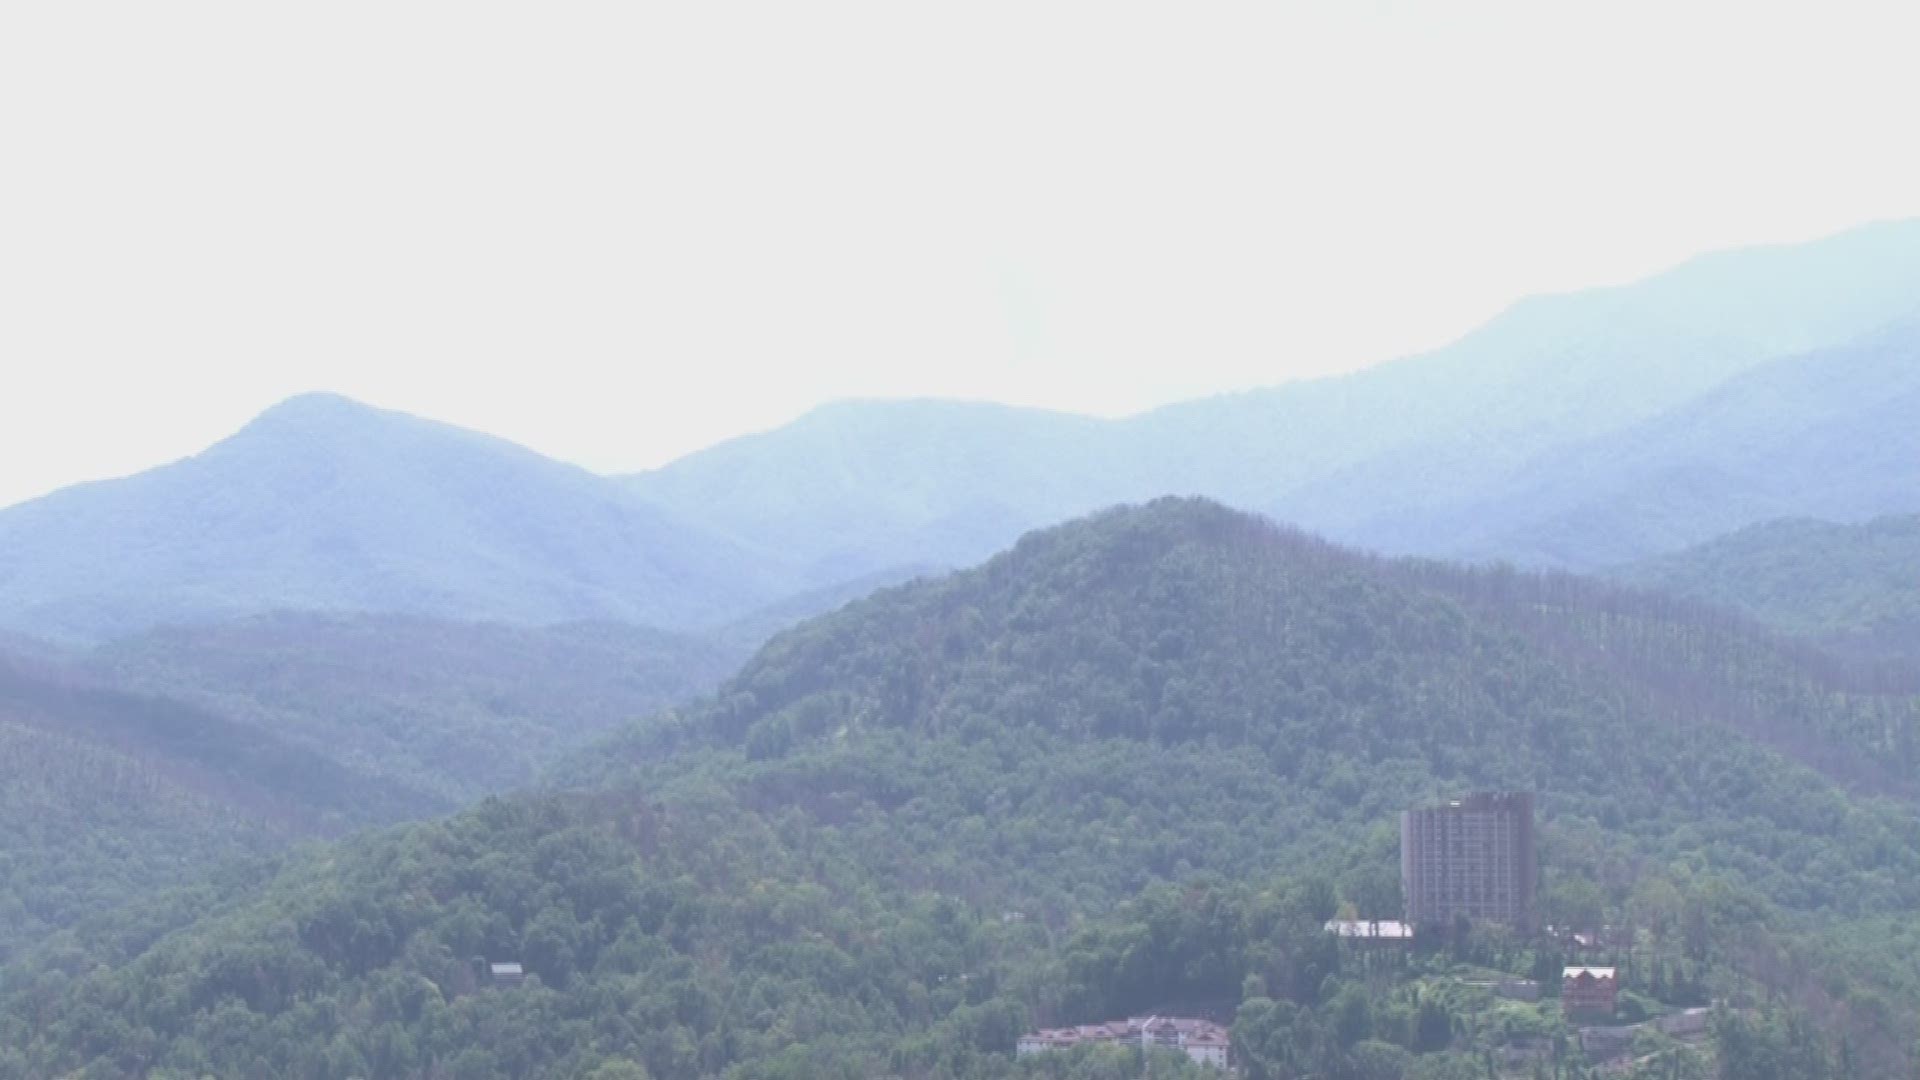 The study says the Great Smoky Mountains National Park has more ozone than the city of Philadelphia...but an air quality specialist here says that data doesn't tell the whole story